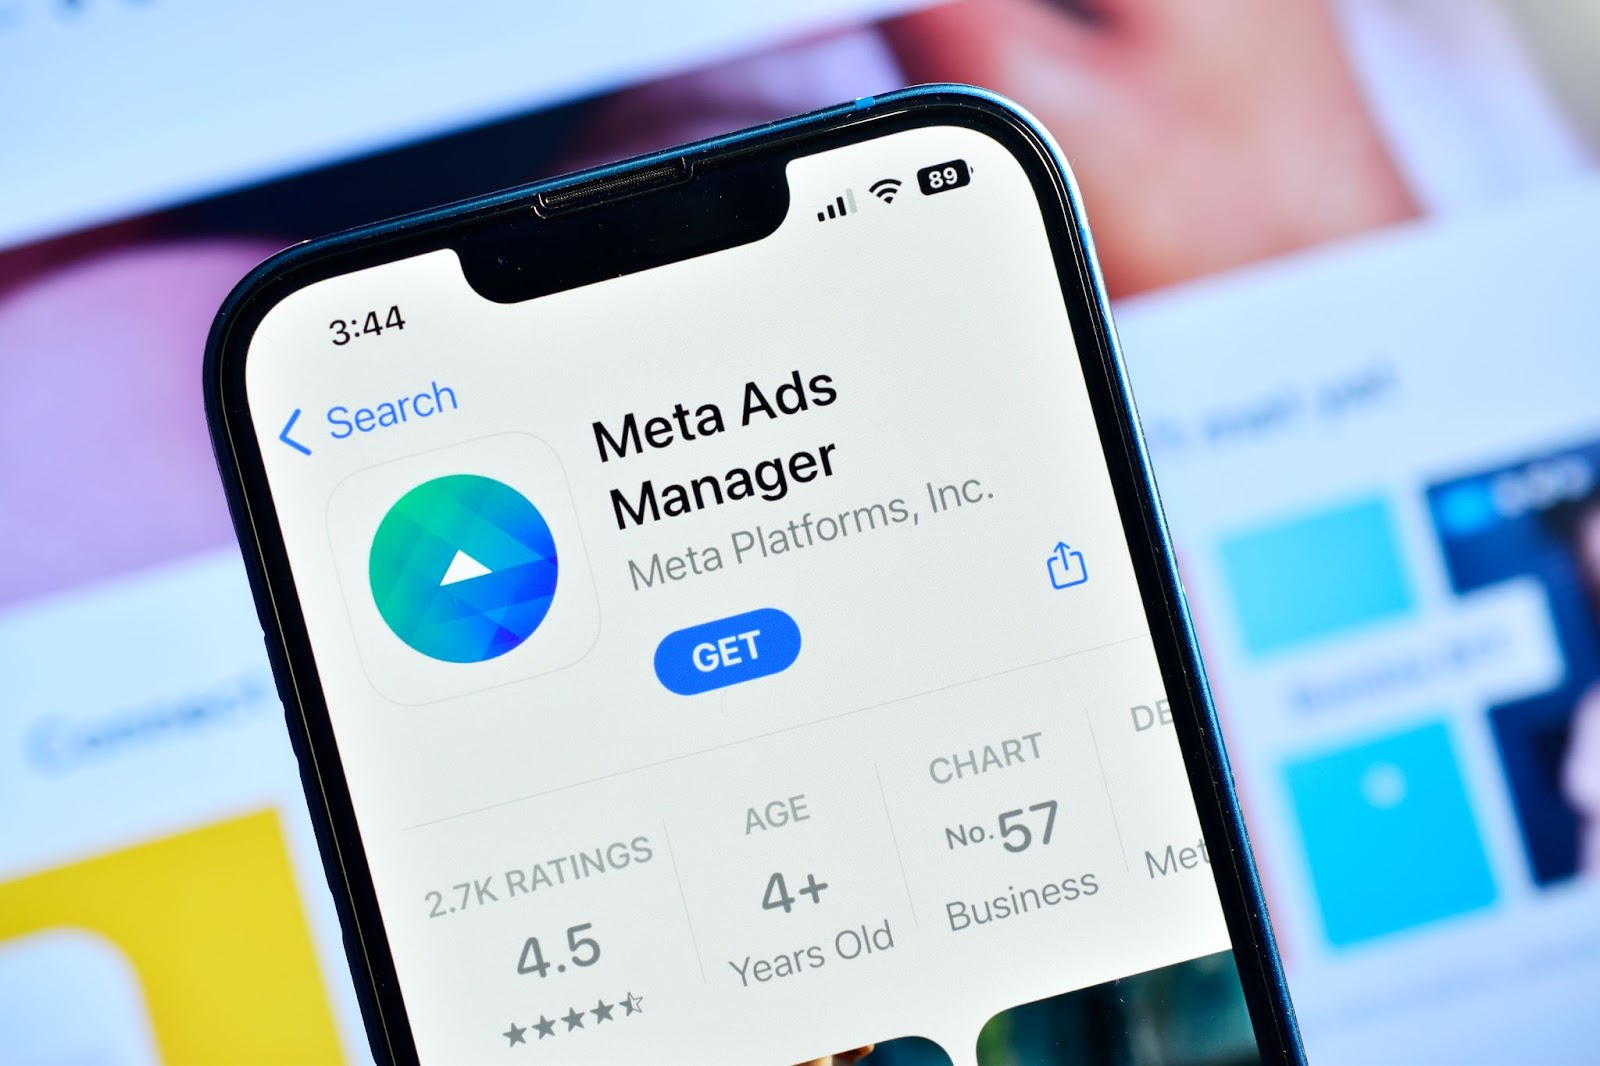 A screenshot of a phone checking out the Meta Ads Manager app